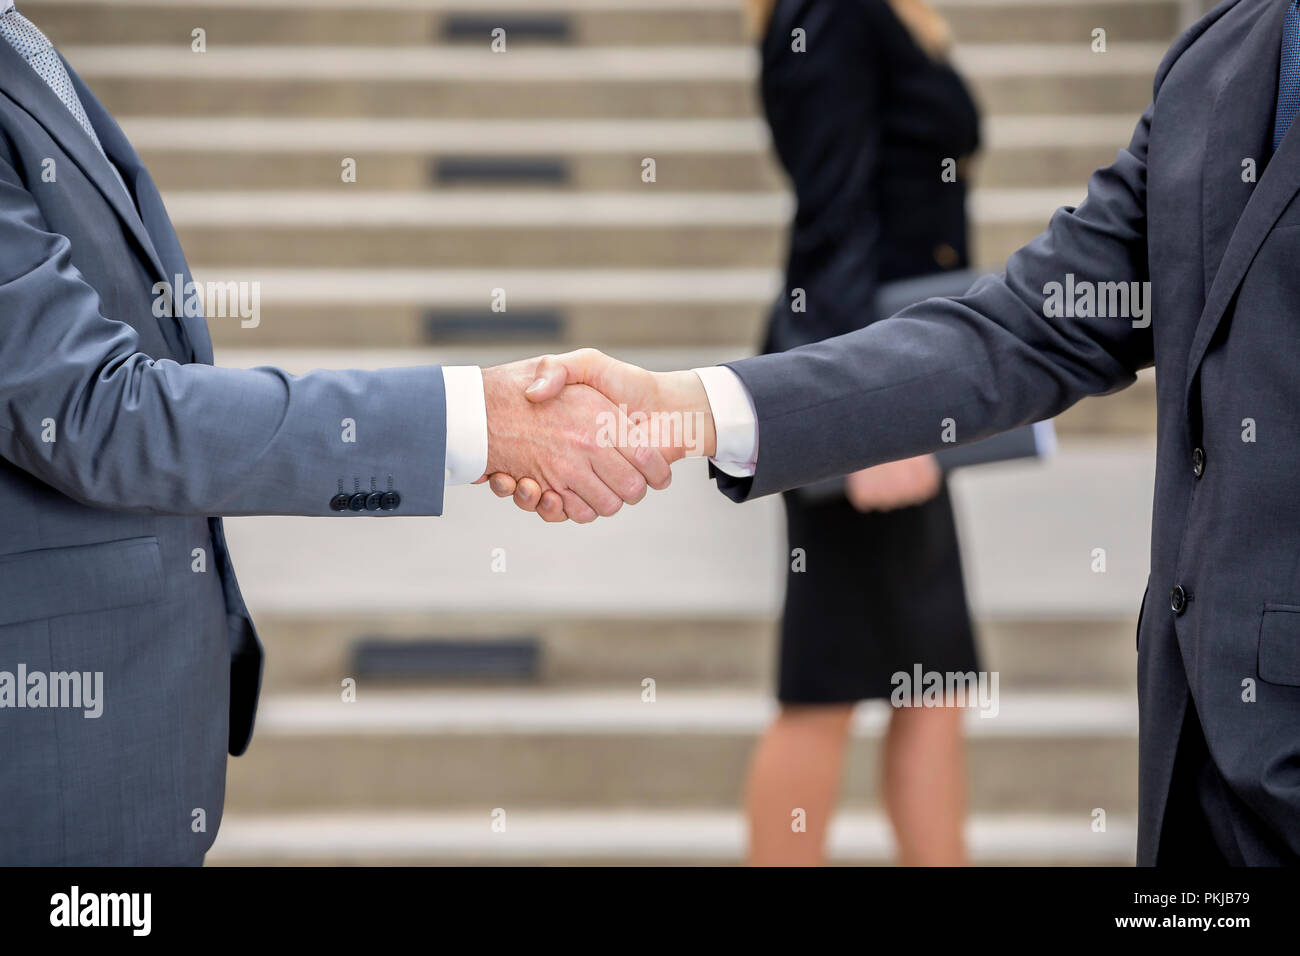 Professional handshake with female colleague in the background Stock Photo